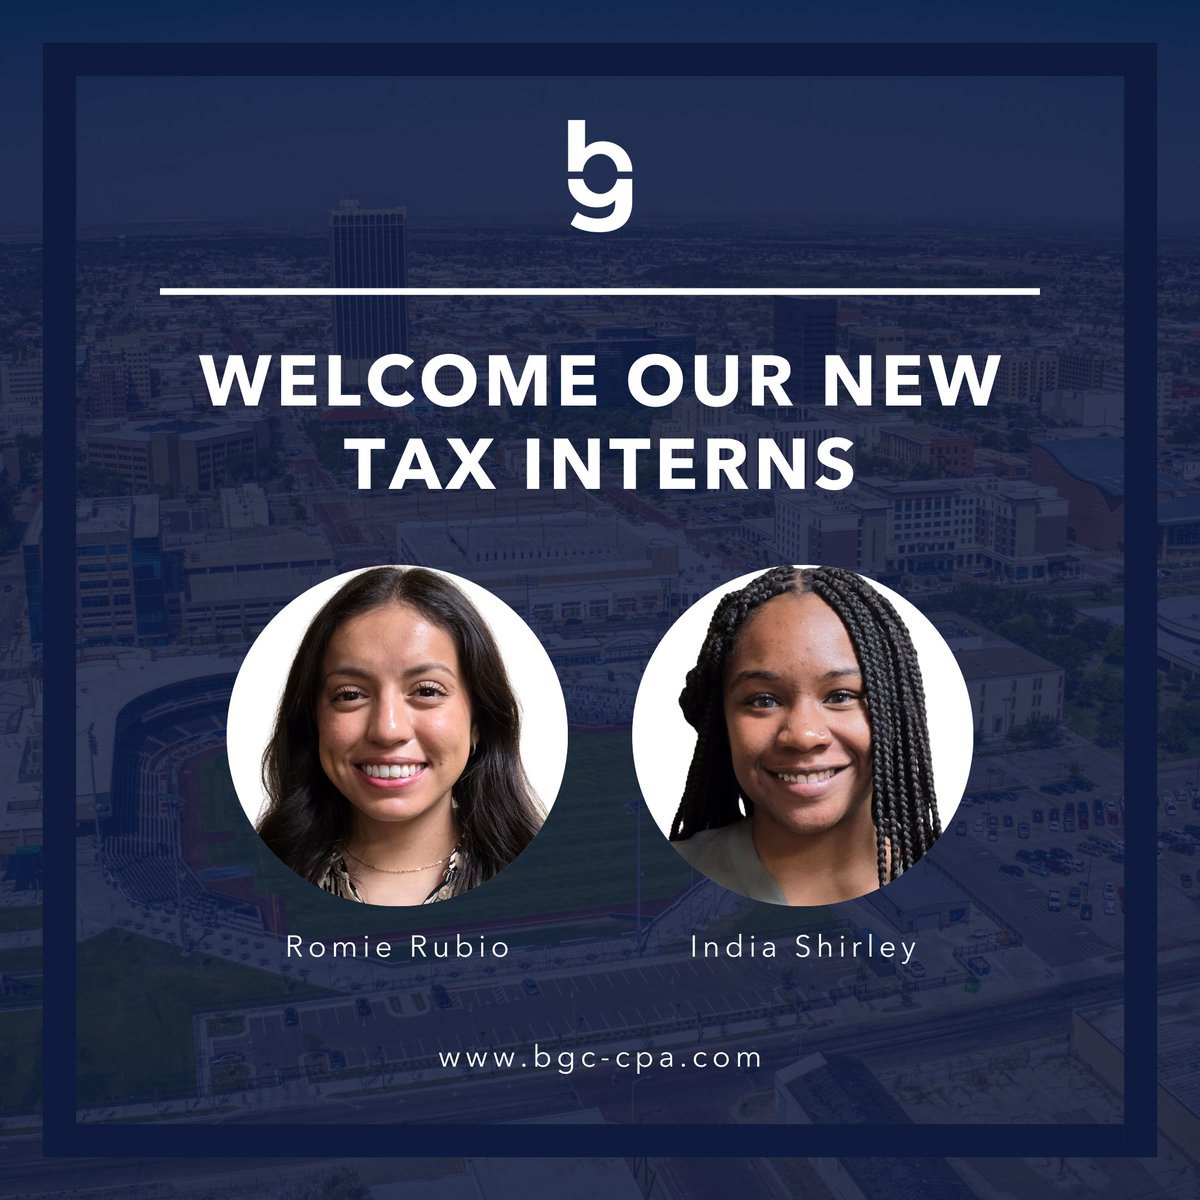 We’re honored to welcome our new tax interns, India Shirley and Romie Rubio, to the Brown Graham family!

Your fresh perspectives and innovative ideas are going to make a huge impact at our Amarillo office.

#newhires #browngraham #welcome